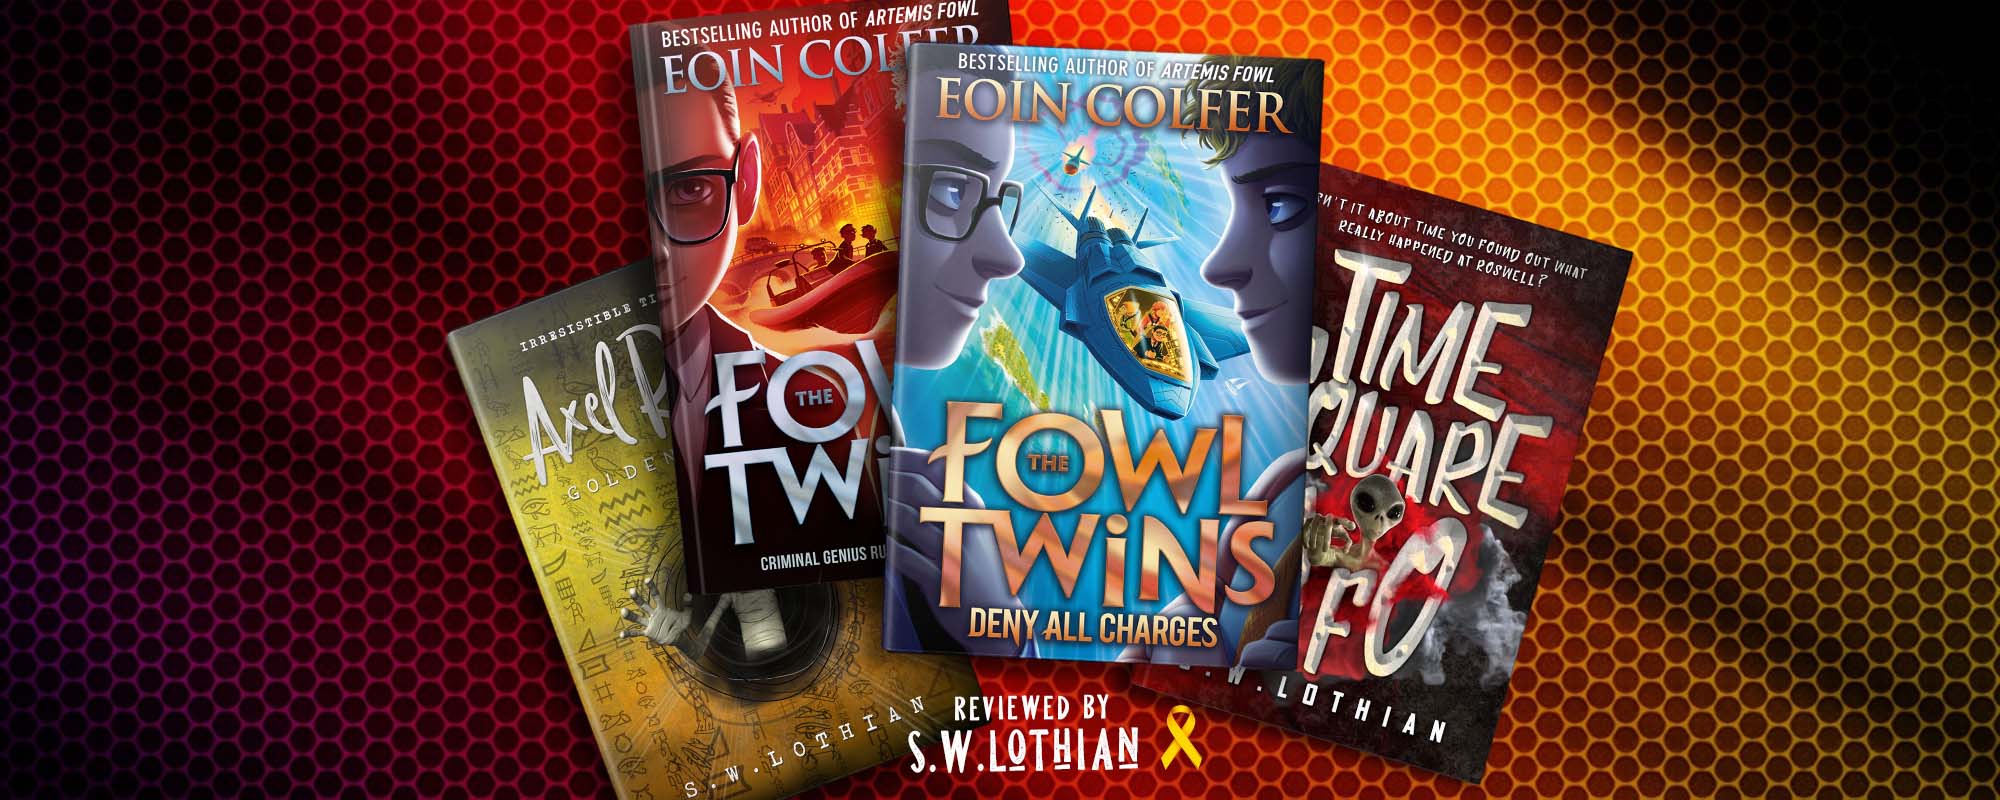 Deny All Charges (Fowl Twins 2) – Eoin Colfer – S.W. Lothian – Author